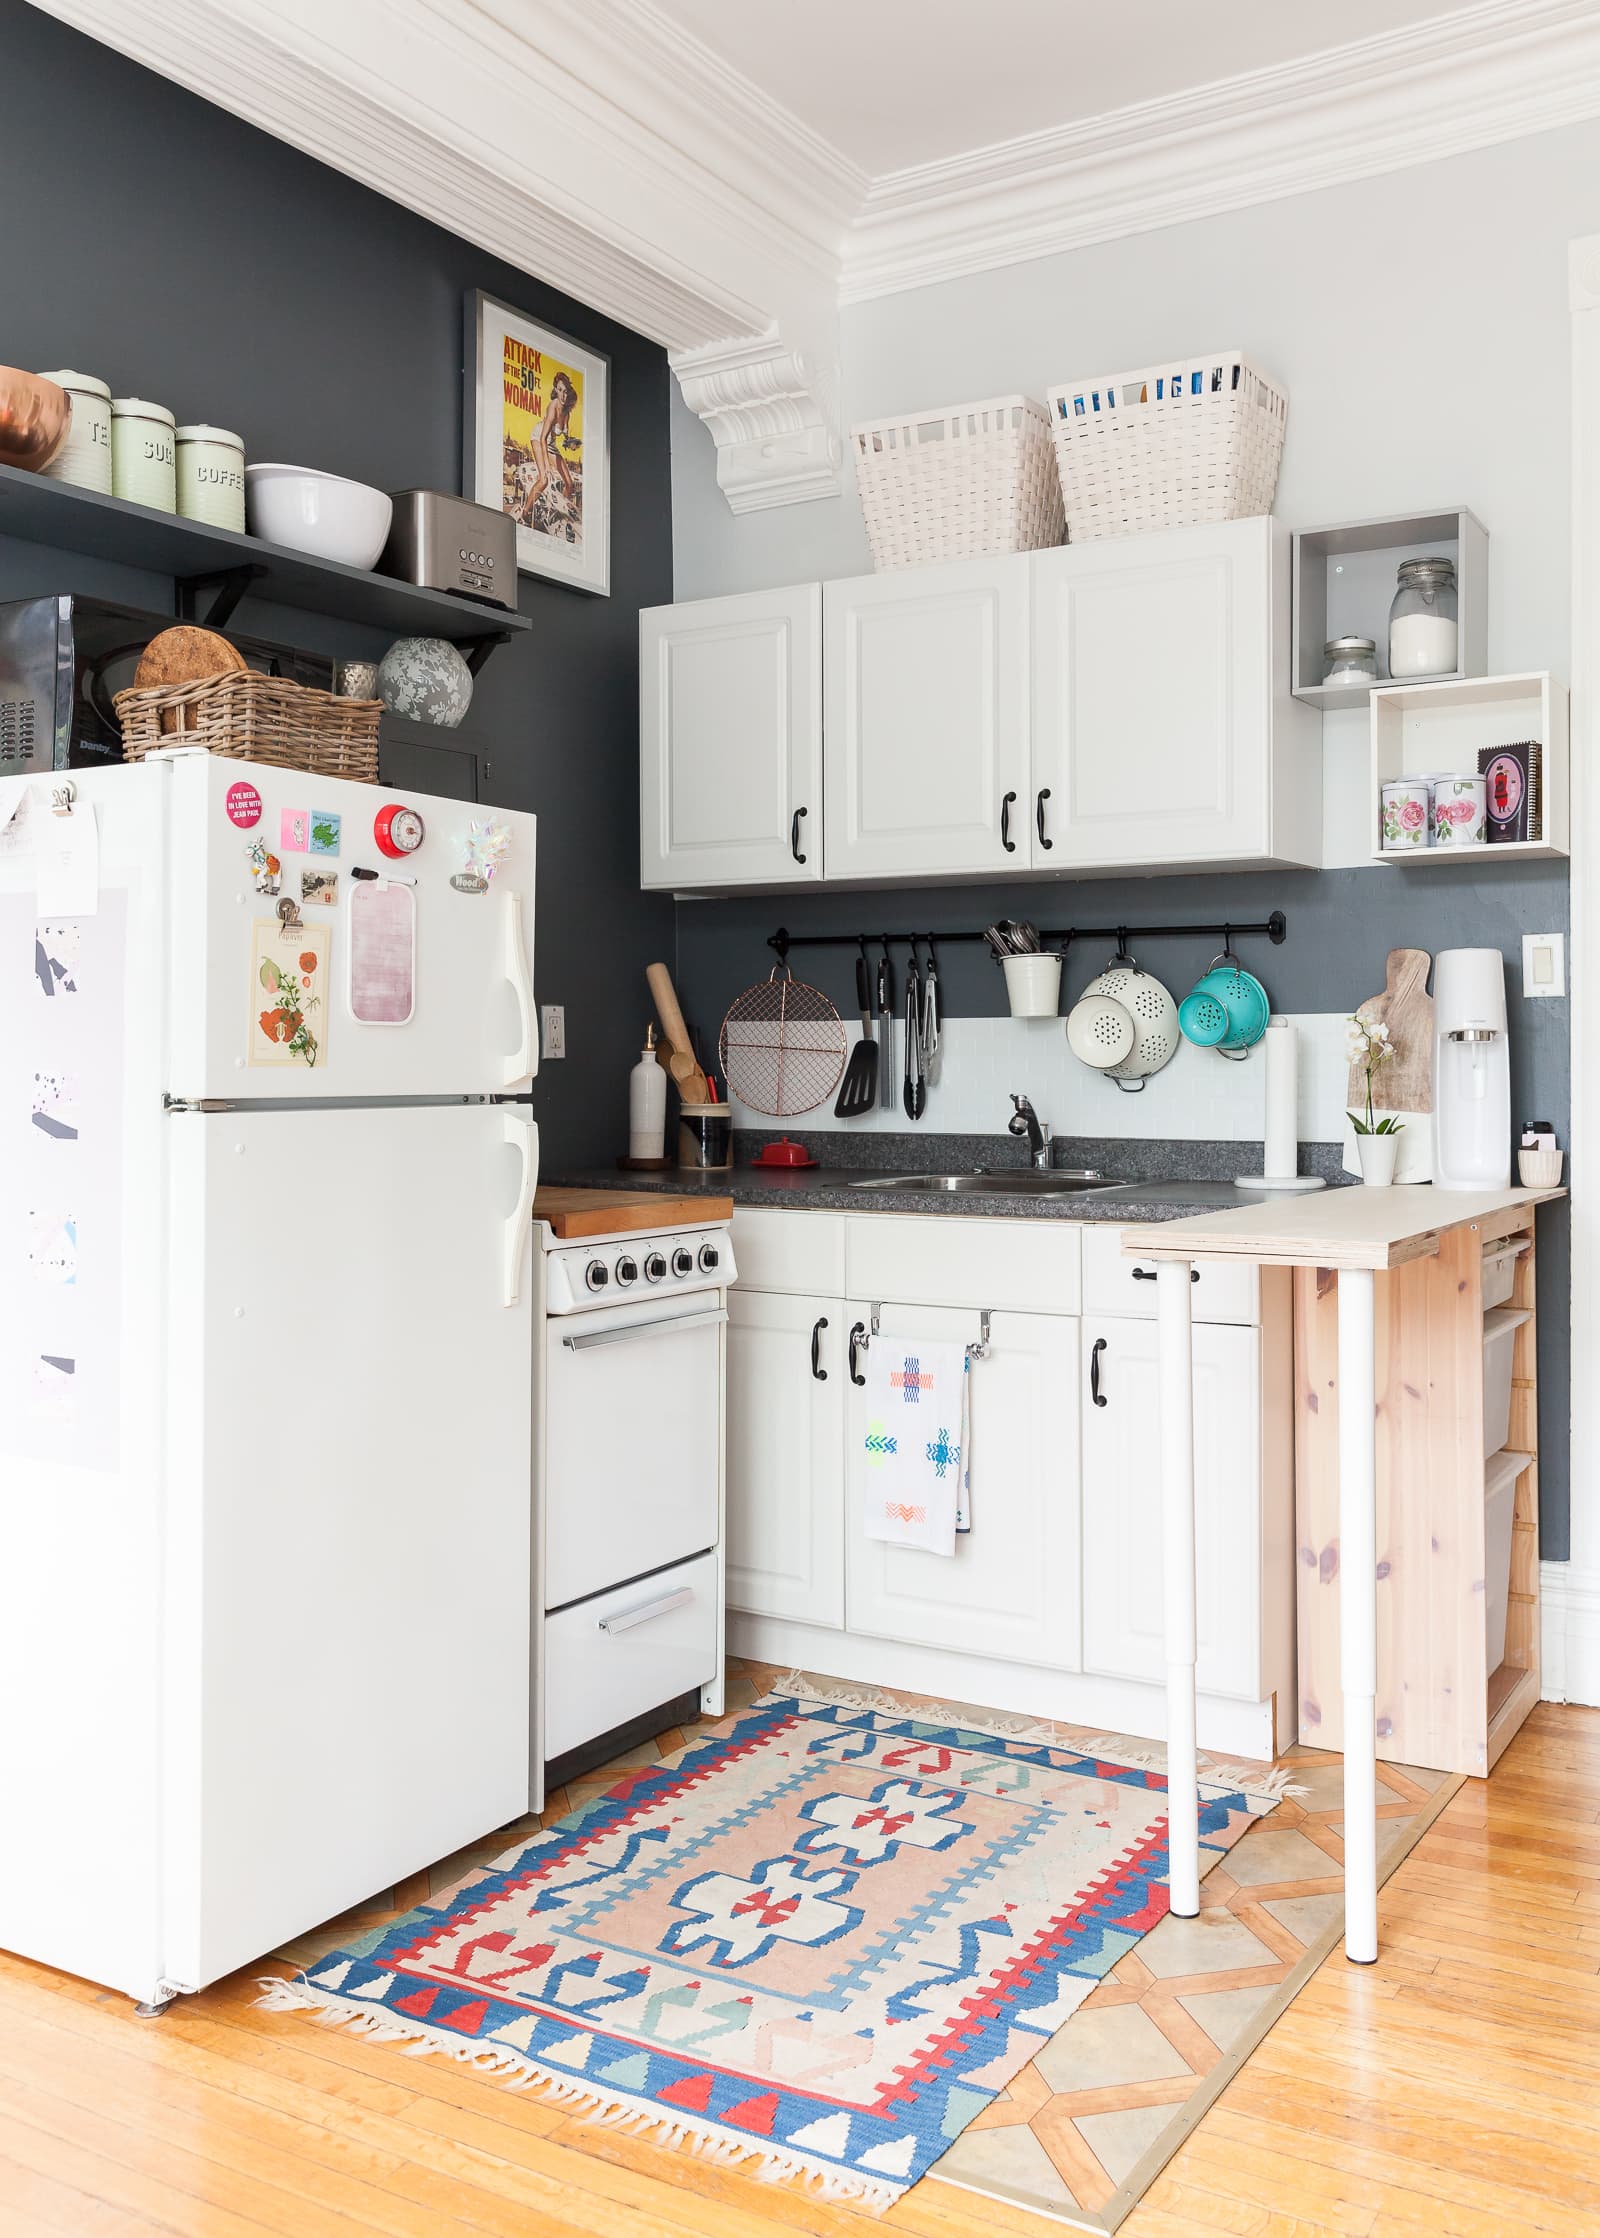 Everything you need to outfit your tiny apartment kitchen